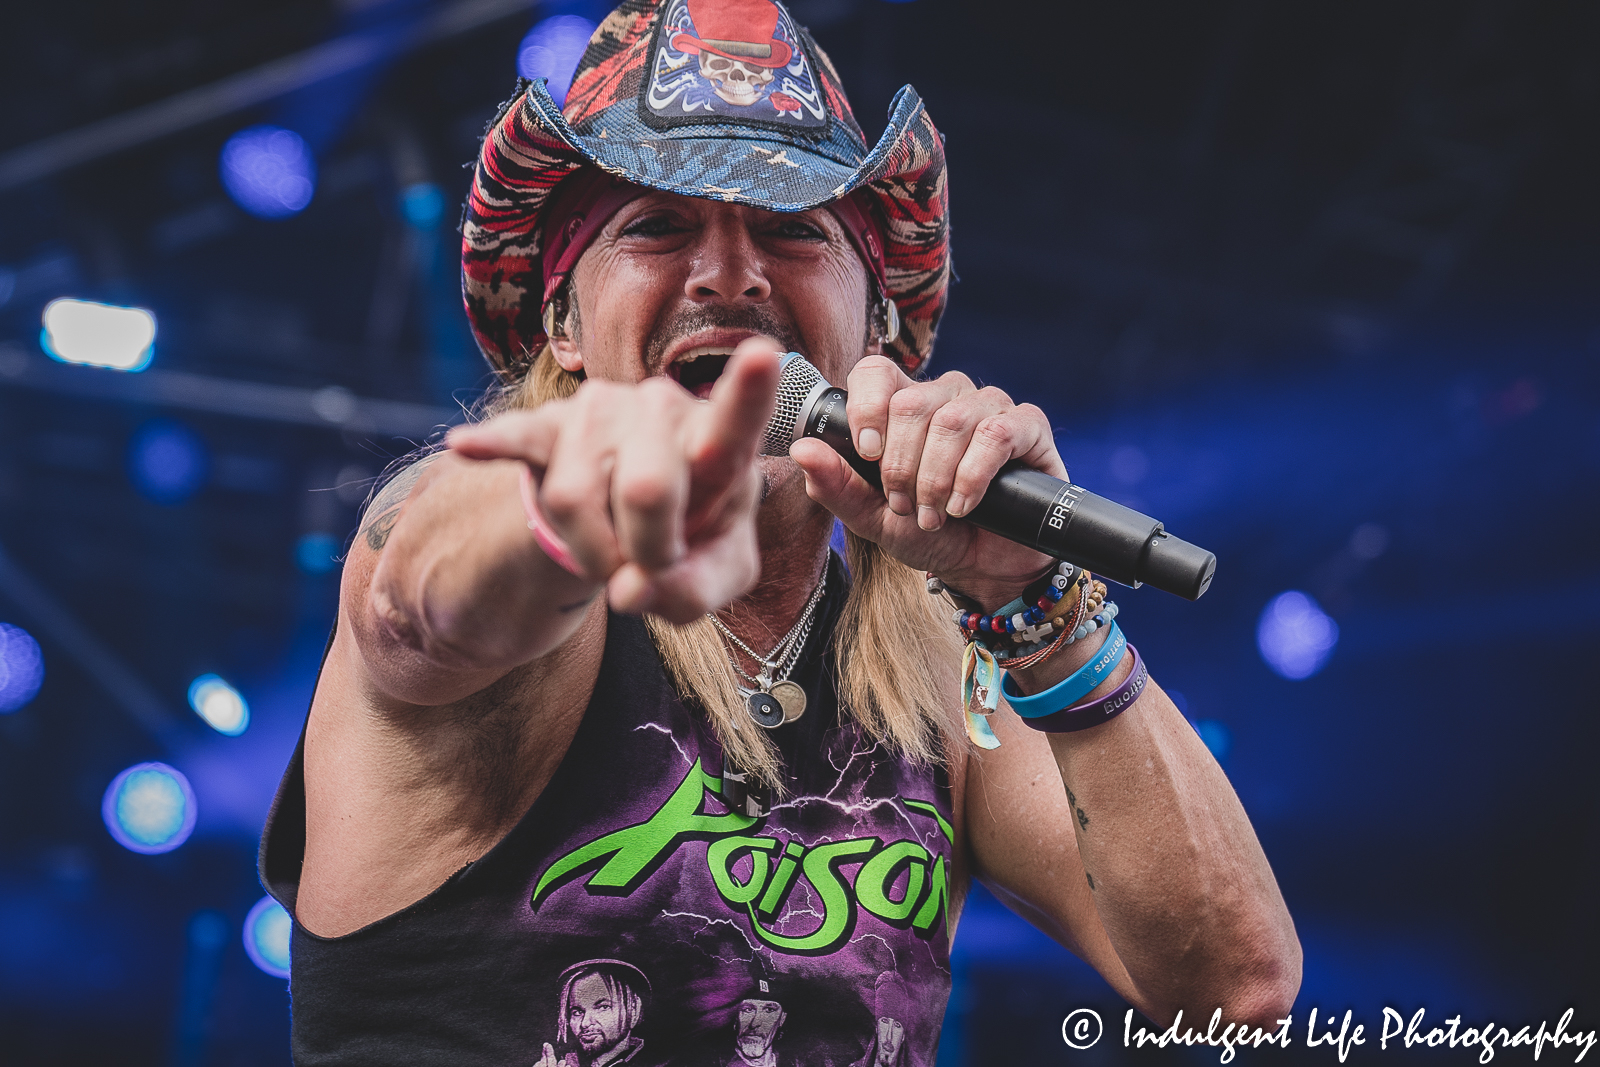 Poison lead singer Bret Michaels pointing to the camera during his live stadium tour performance at Kauffman Stadium in Kansas City, MO on July 19, 2022.